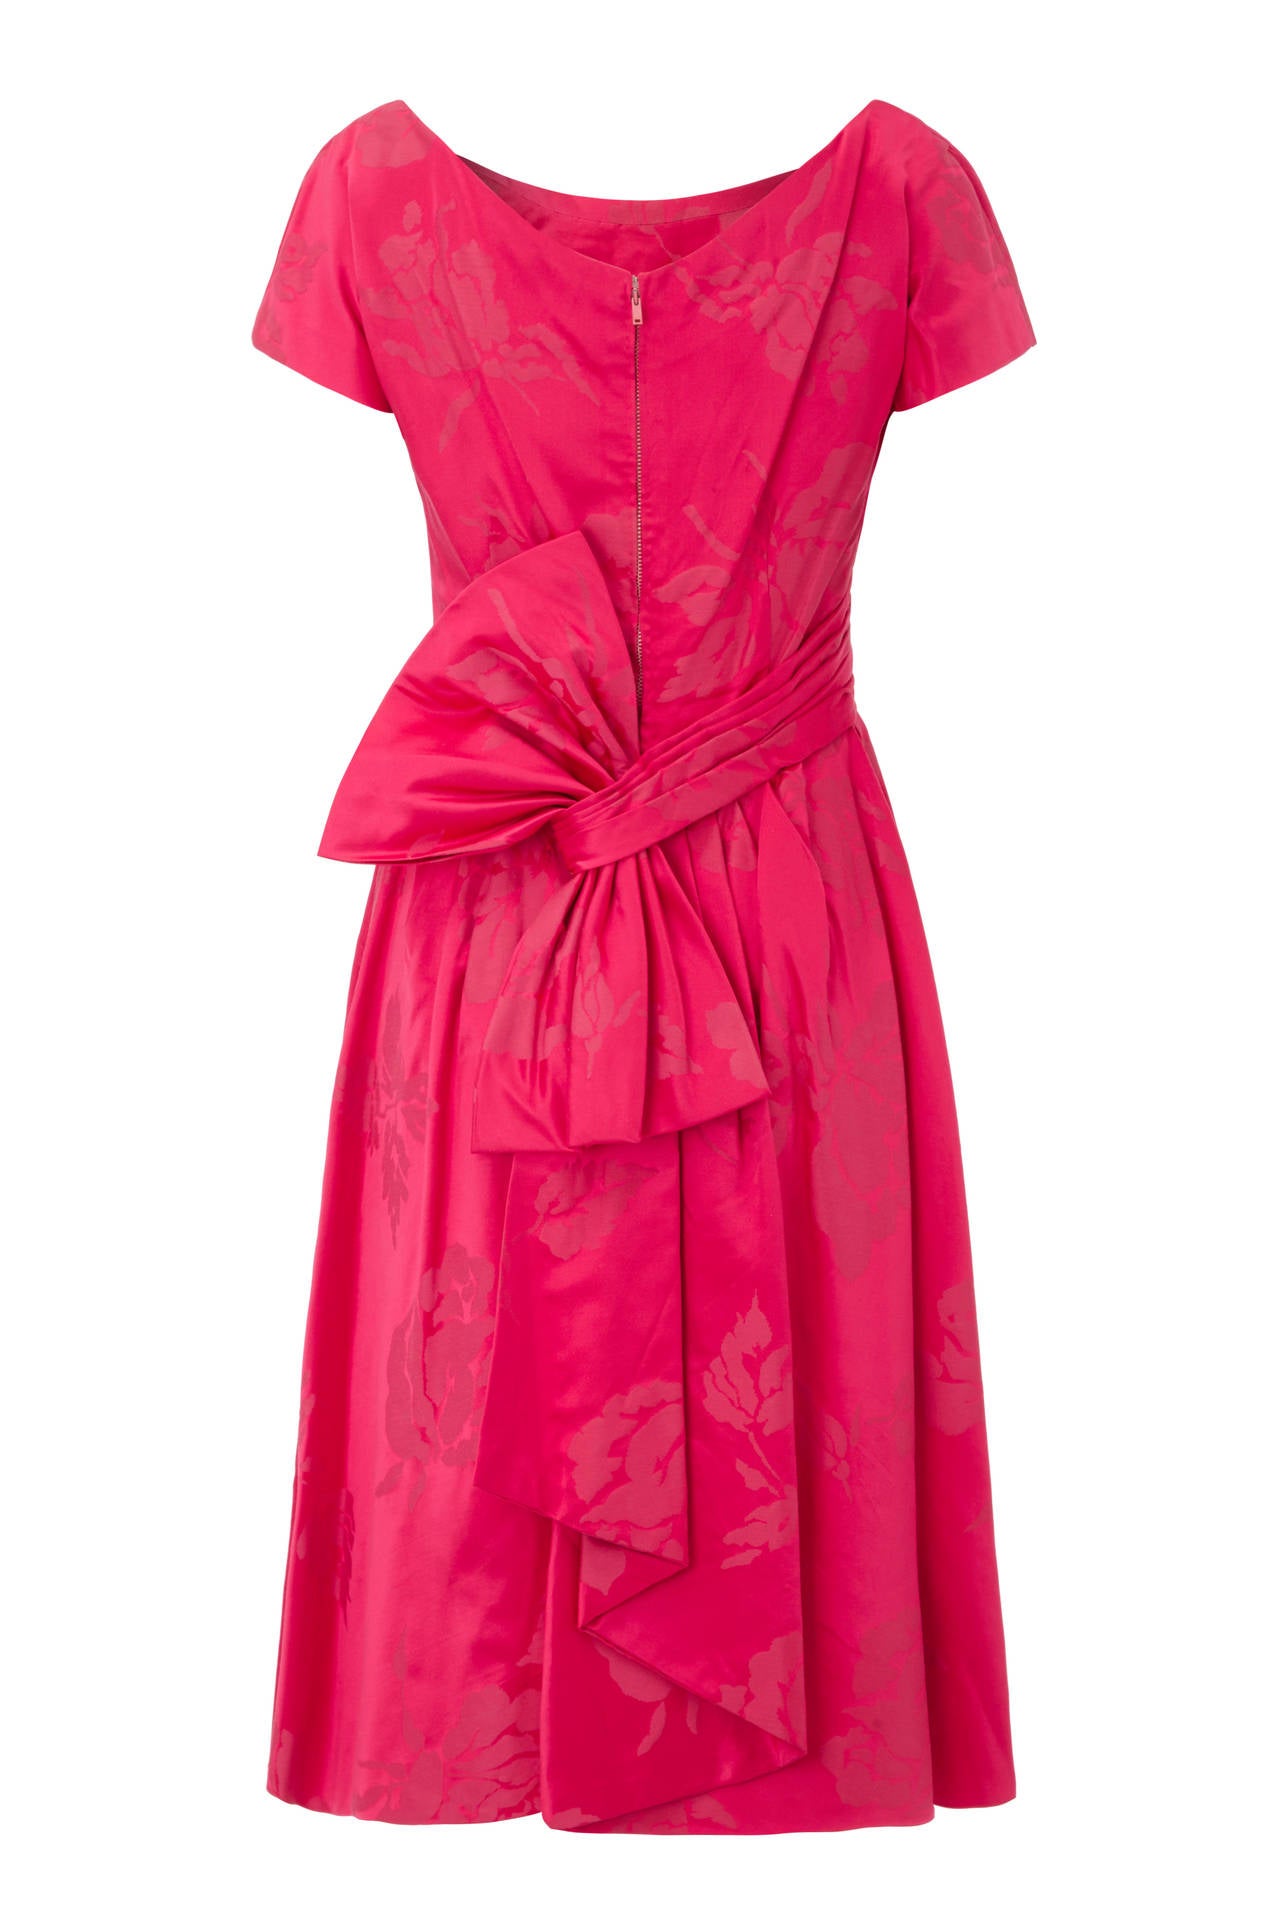 Beautiful pink silk party dress with large rose brocade pattern. Unlabelled and reminiscent of Christian Dior designs, this fun piece features a scoop neckline, cap sleeves and a large bow detail at the back.  It is fully lined in organza, fastens